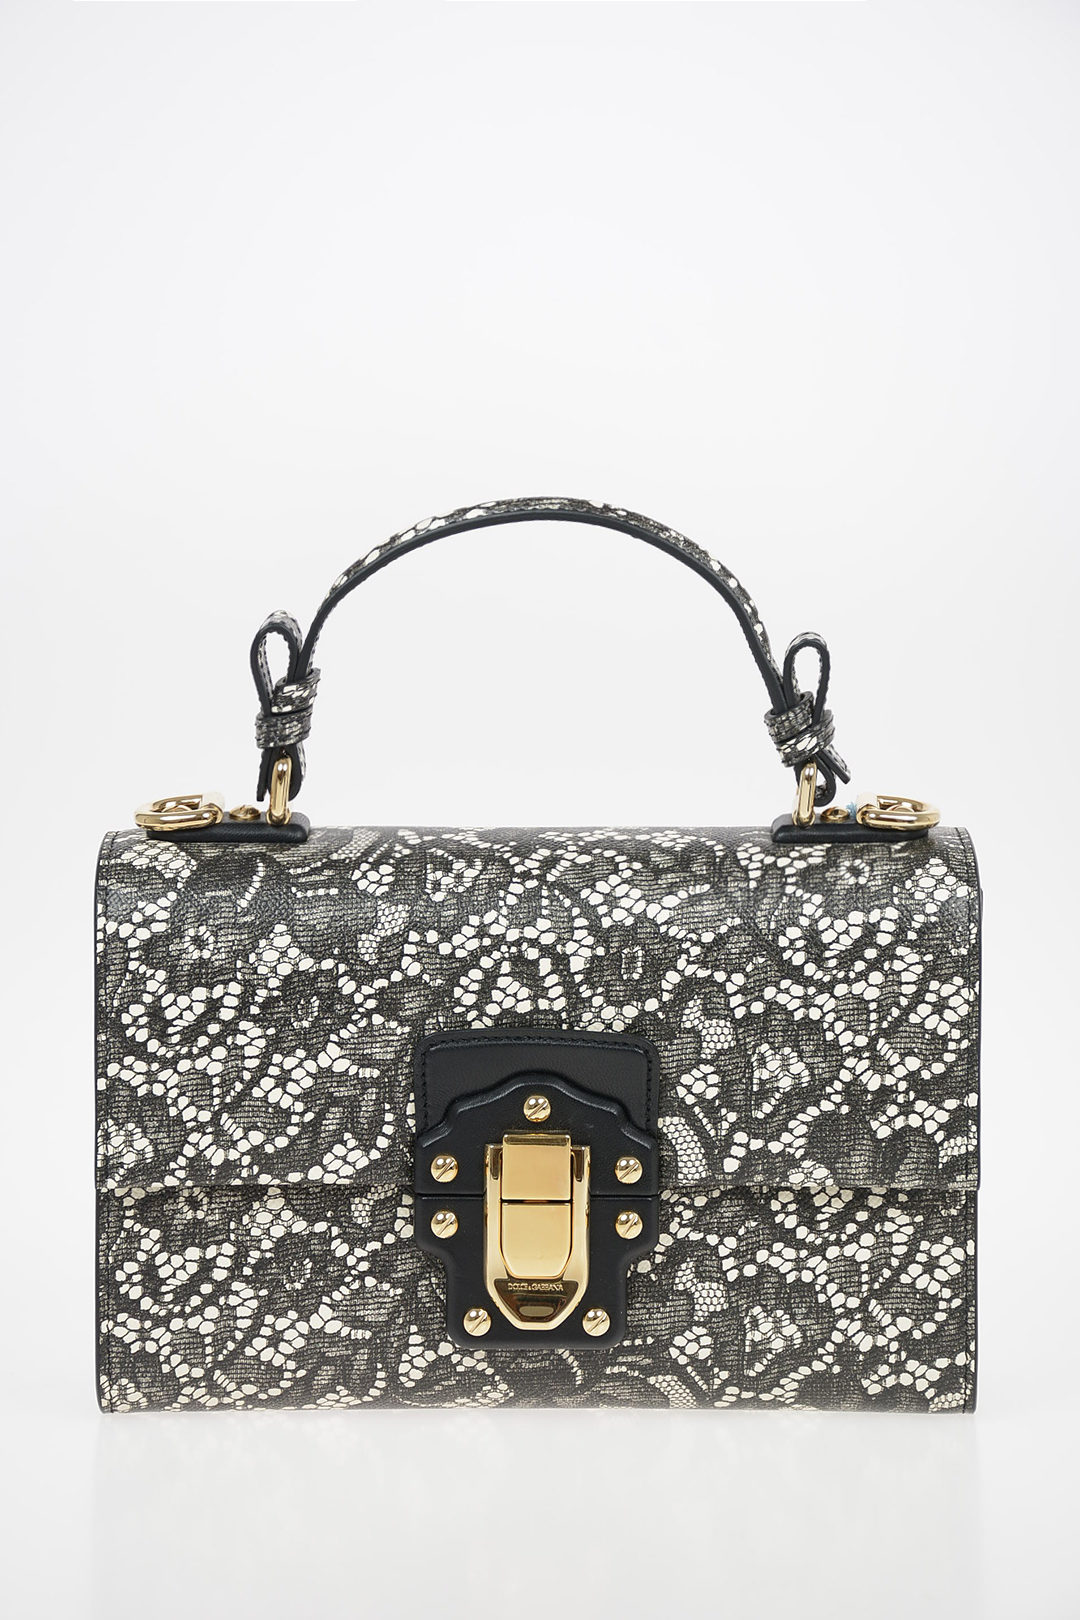 Dolce & Gabbana Lace Printed Leather LUCIA Top Handle Bag with Removable  Shoulder Strap women - Glamood Outlet